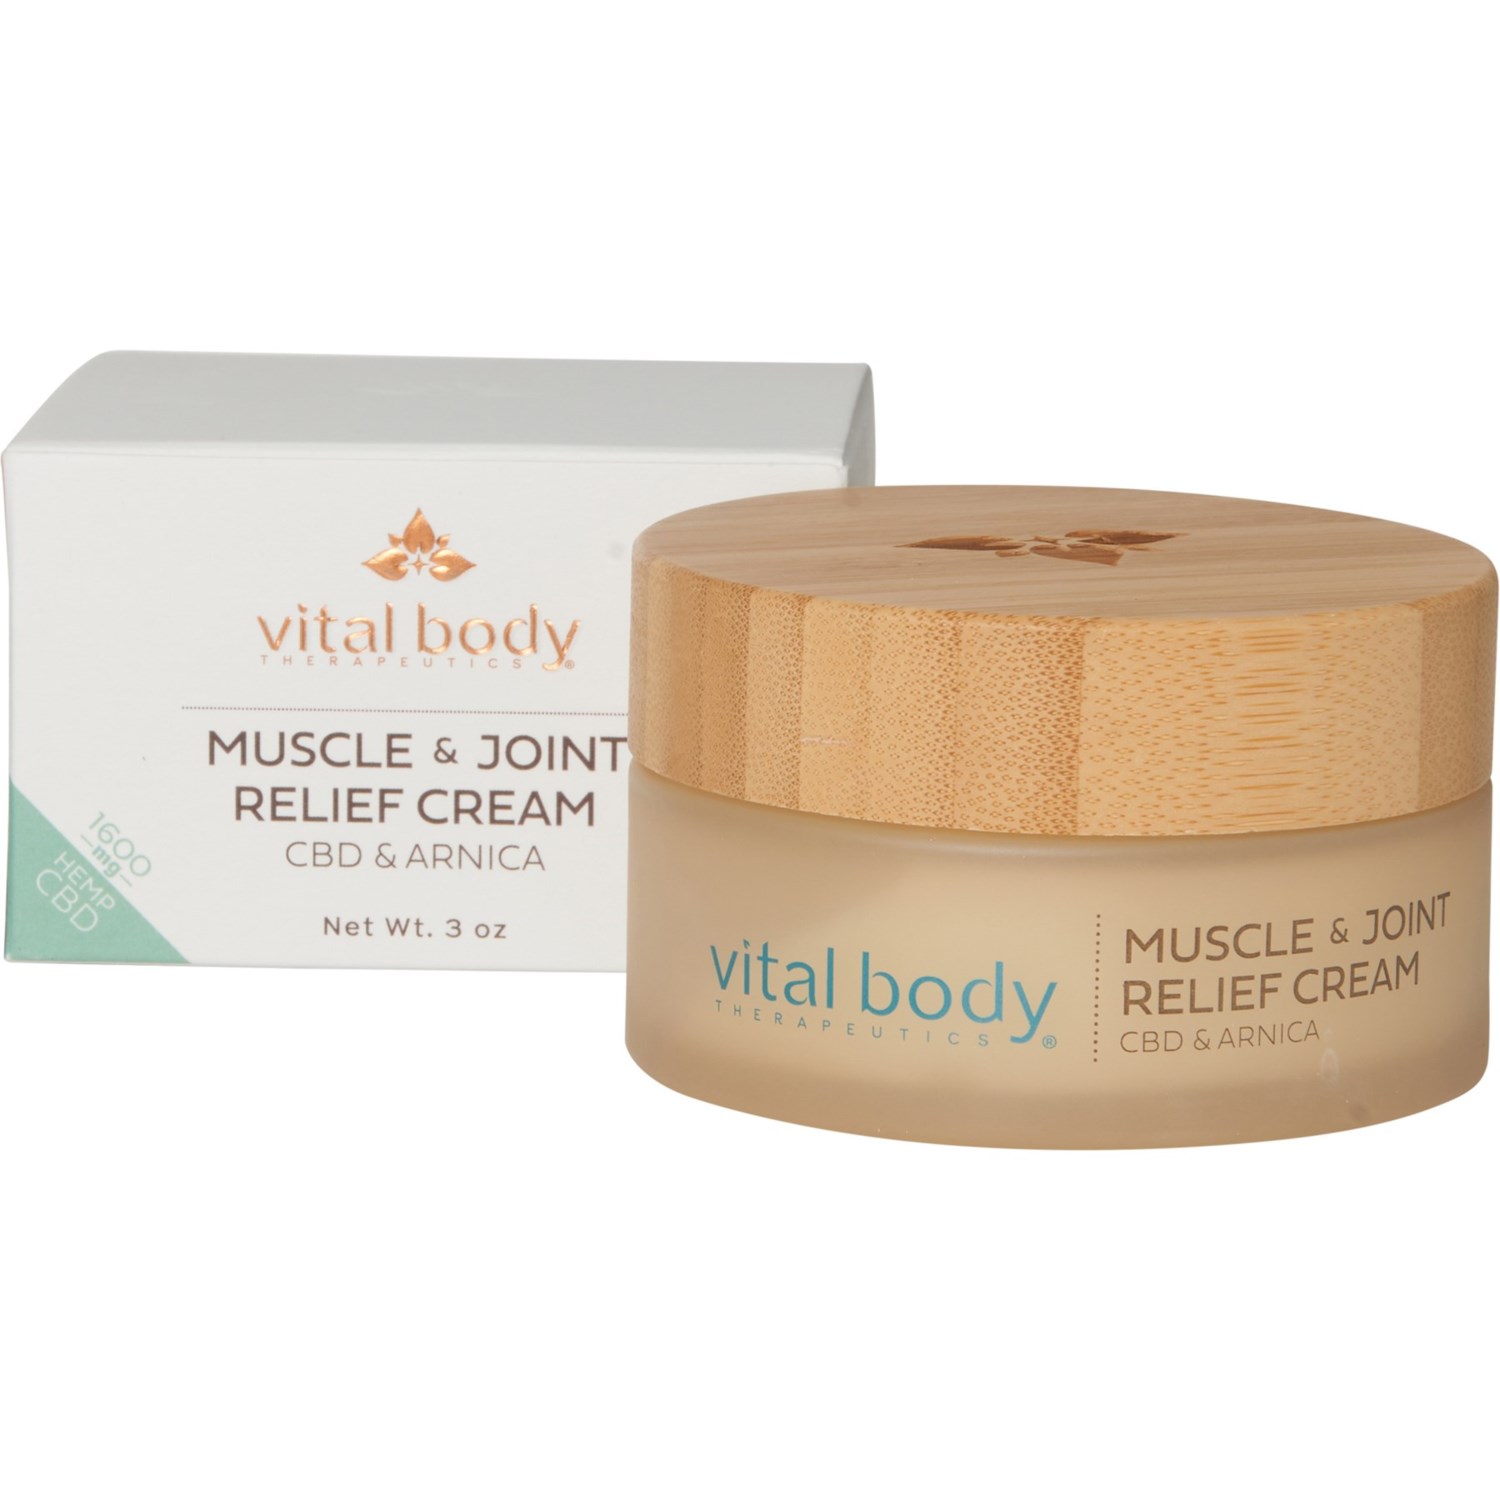 Vital Body CBD and Arnica Muscle and Joint Relief Cream - 3 oz., 1600 mg